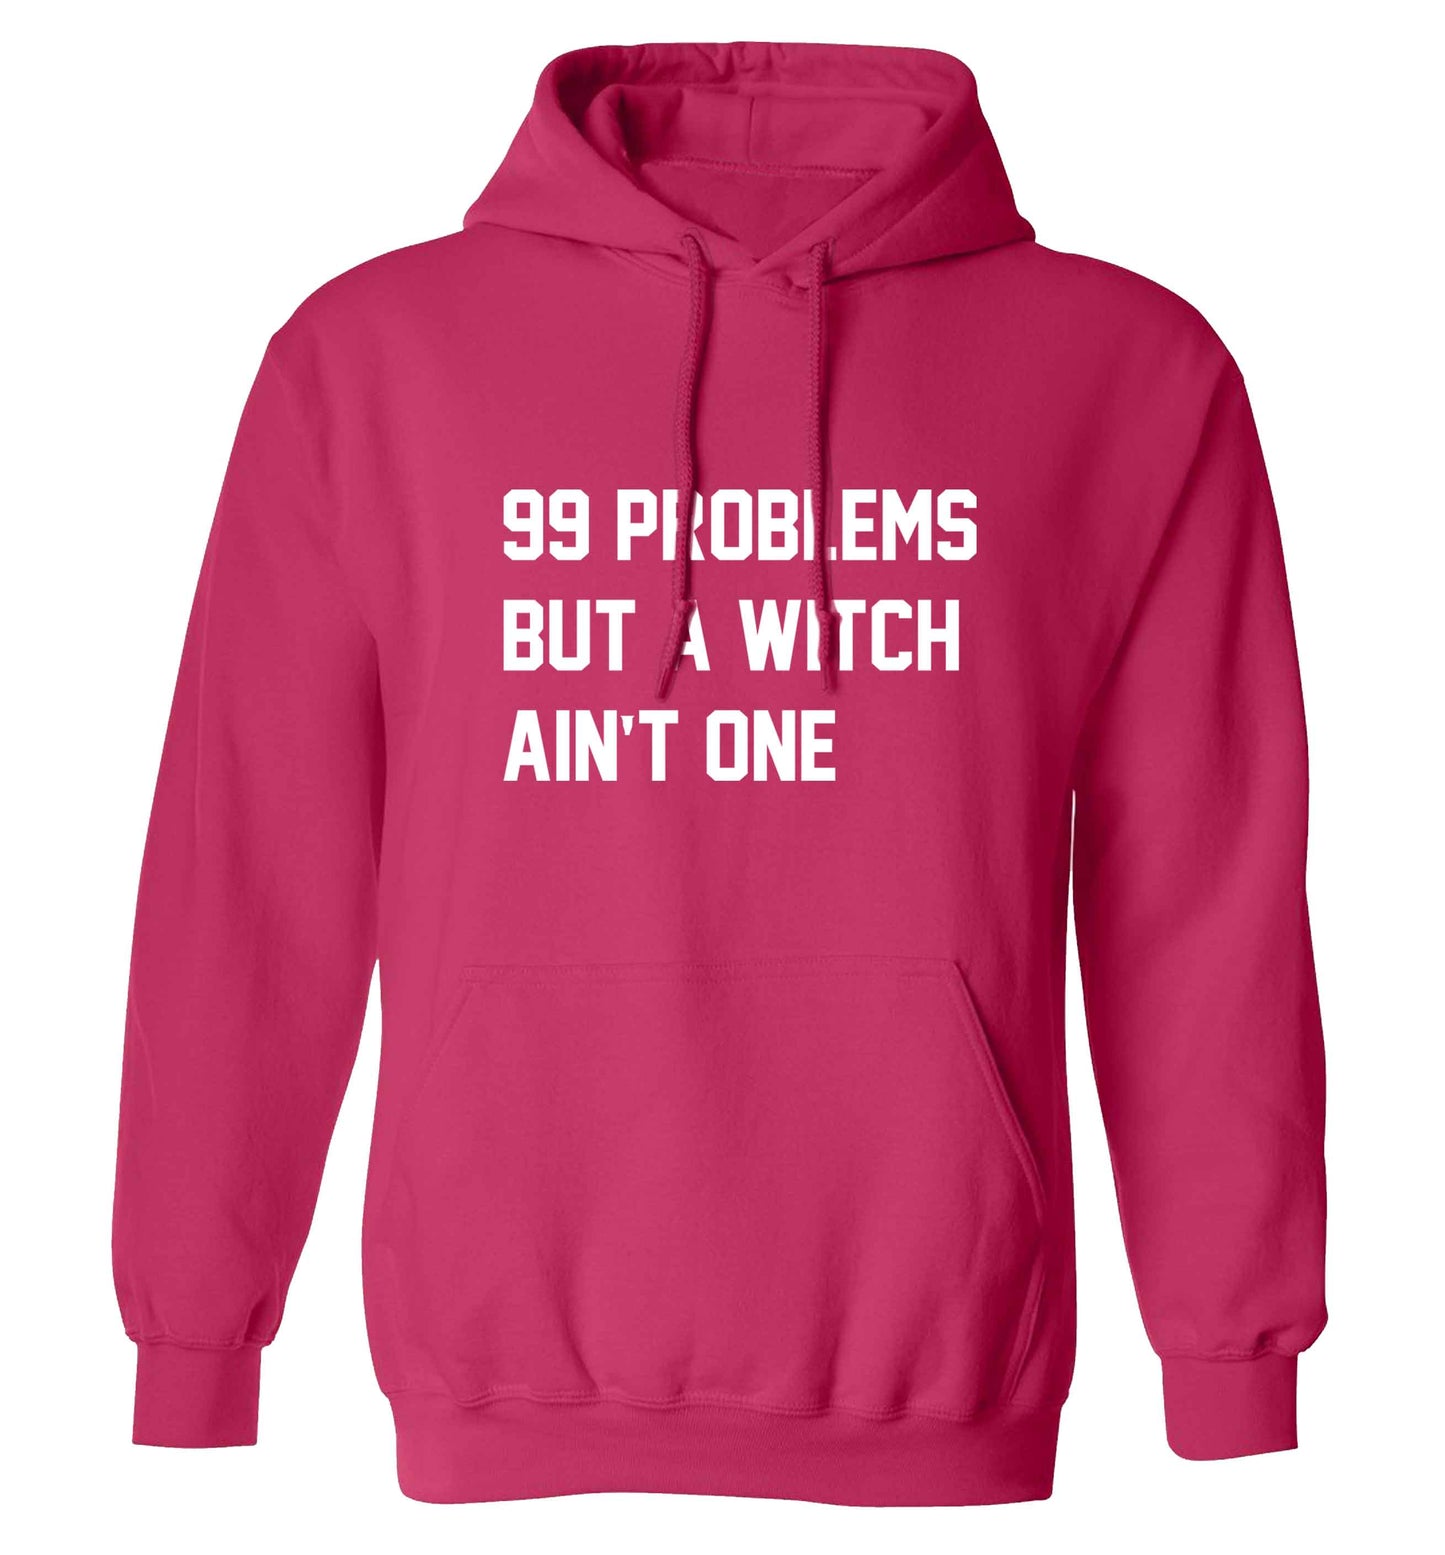 99 Problems but a witch aint one adults unisex pink hoodie 2XL